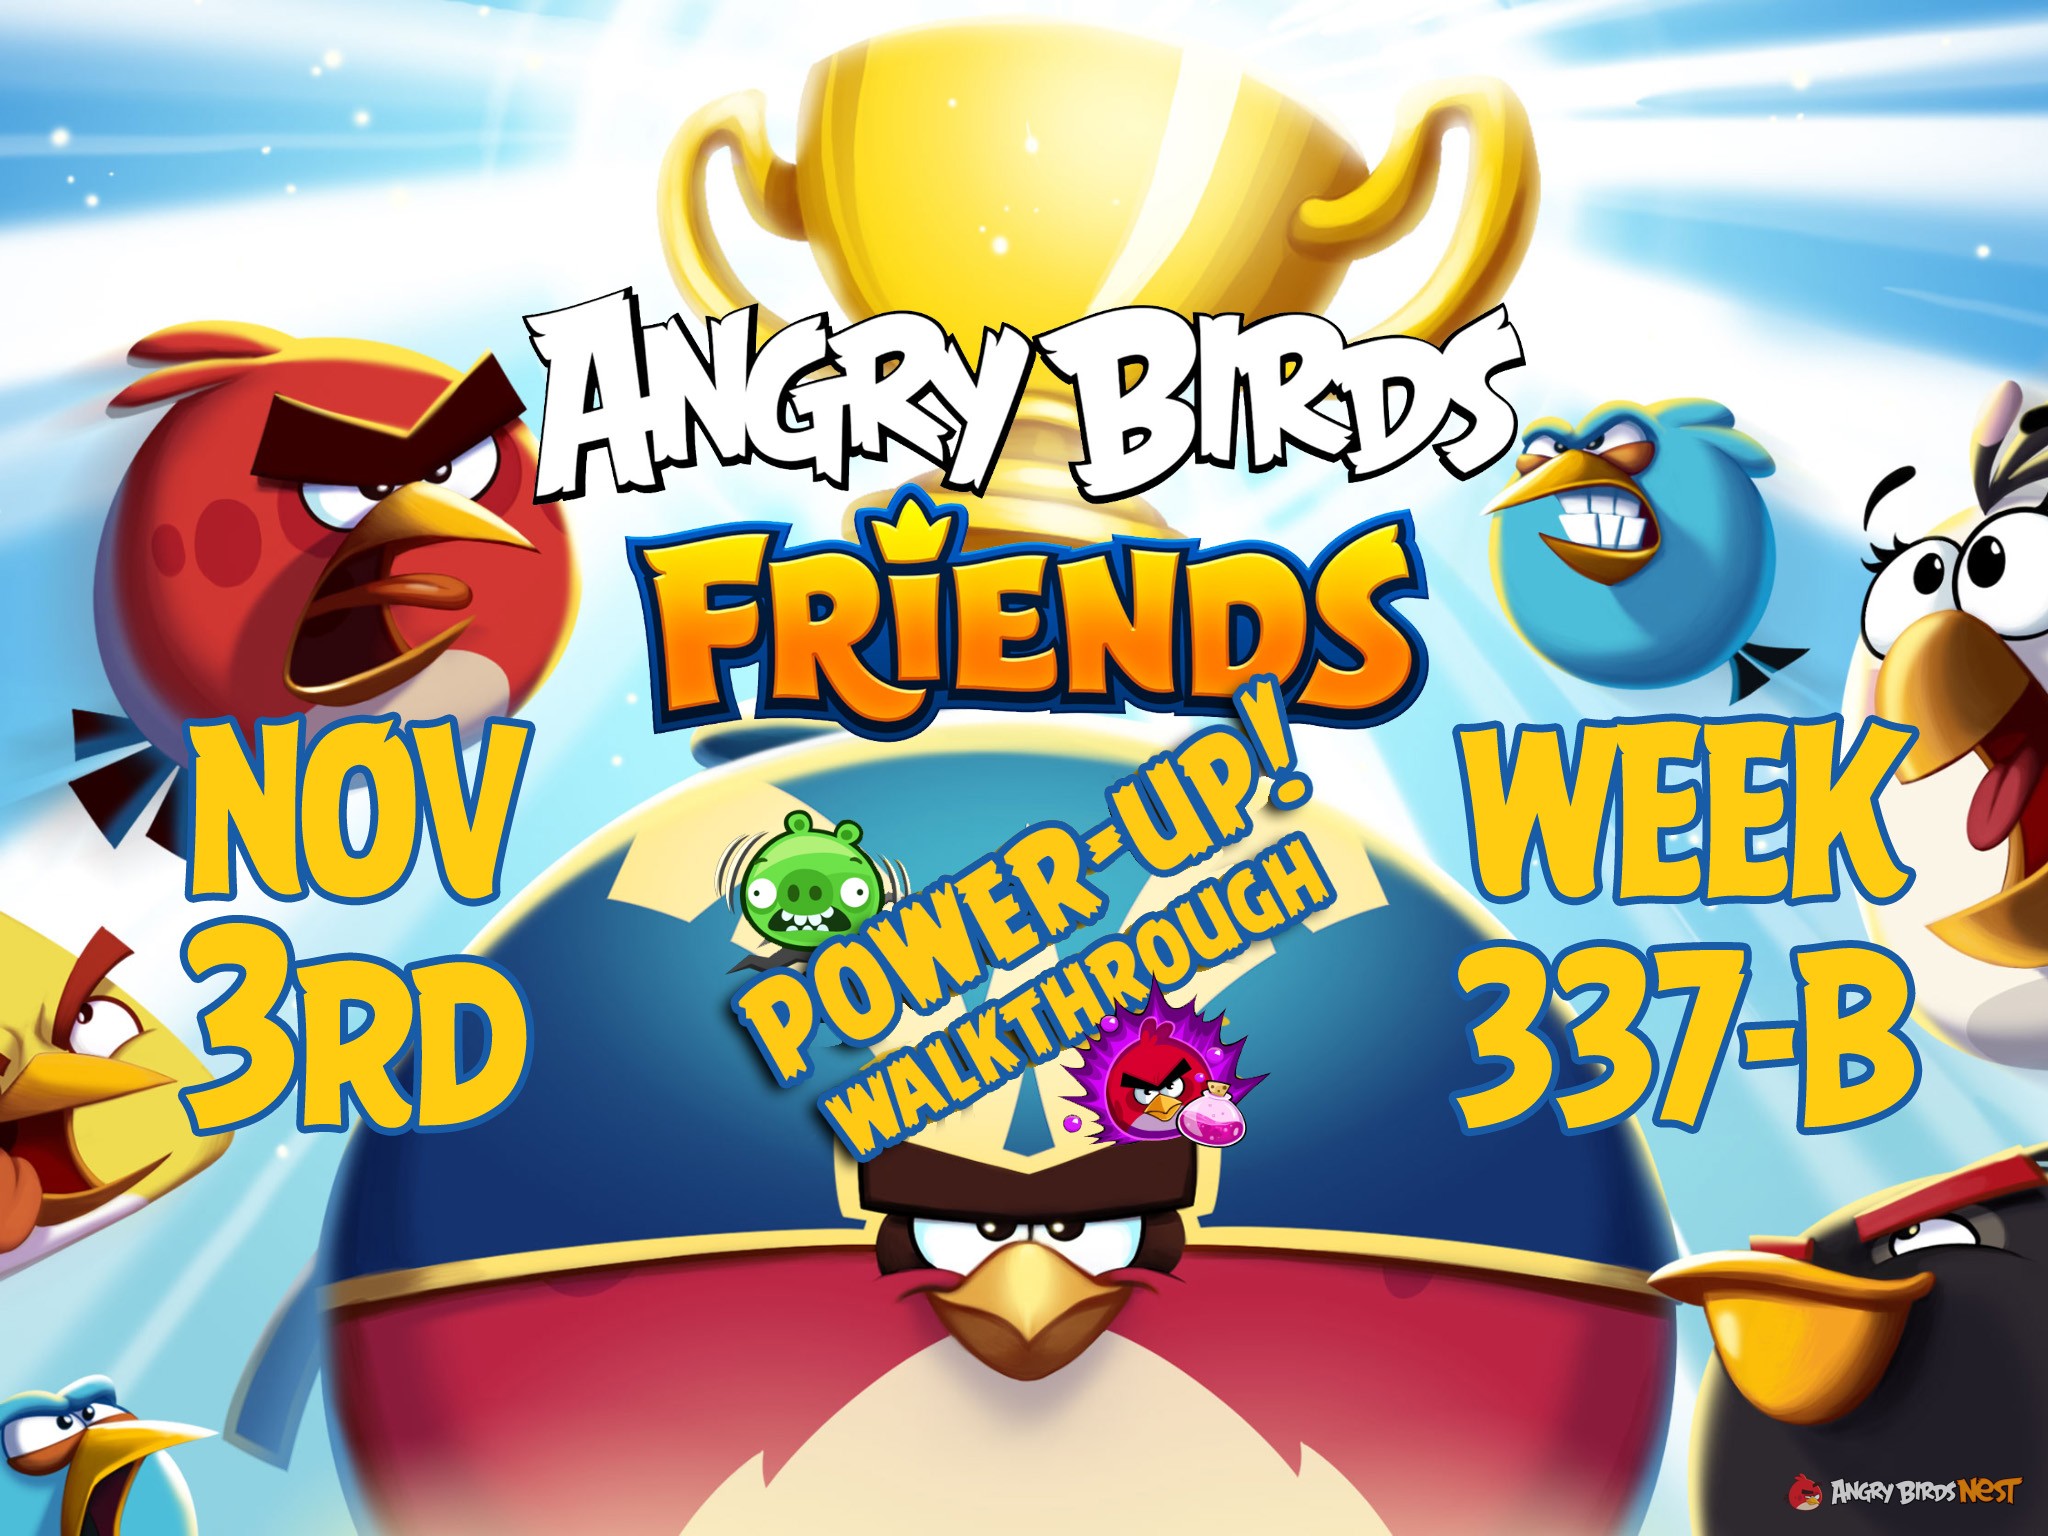 Angry-Birds-Friends-Tournament-Week-337-B-Feature-Image-PU